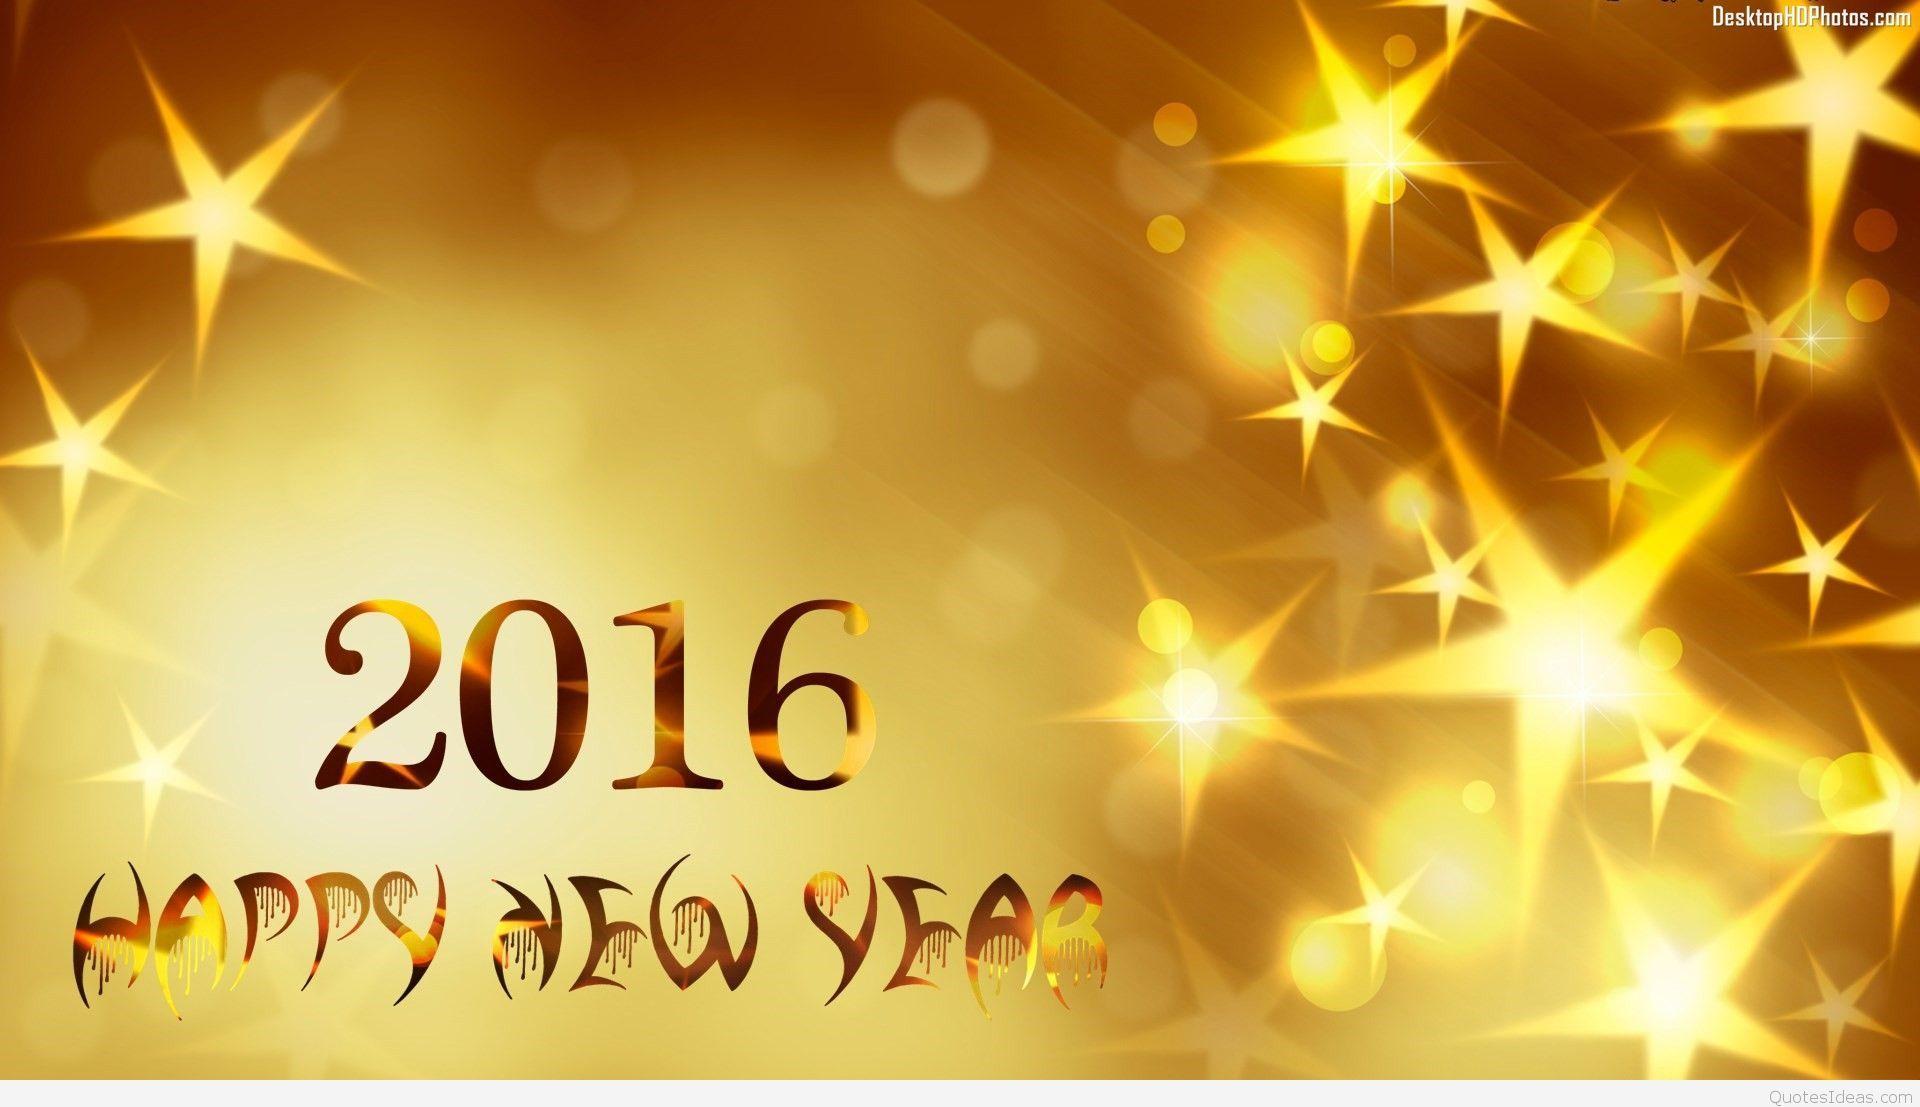 Cute gold Happy New year 2016 wallpaper